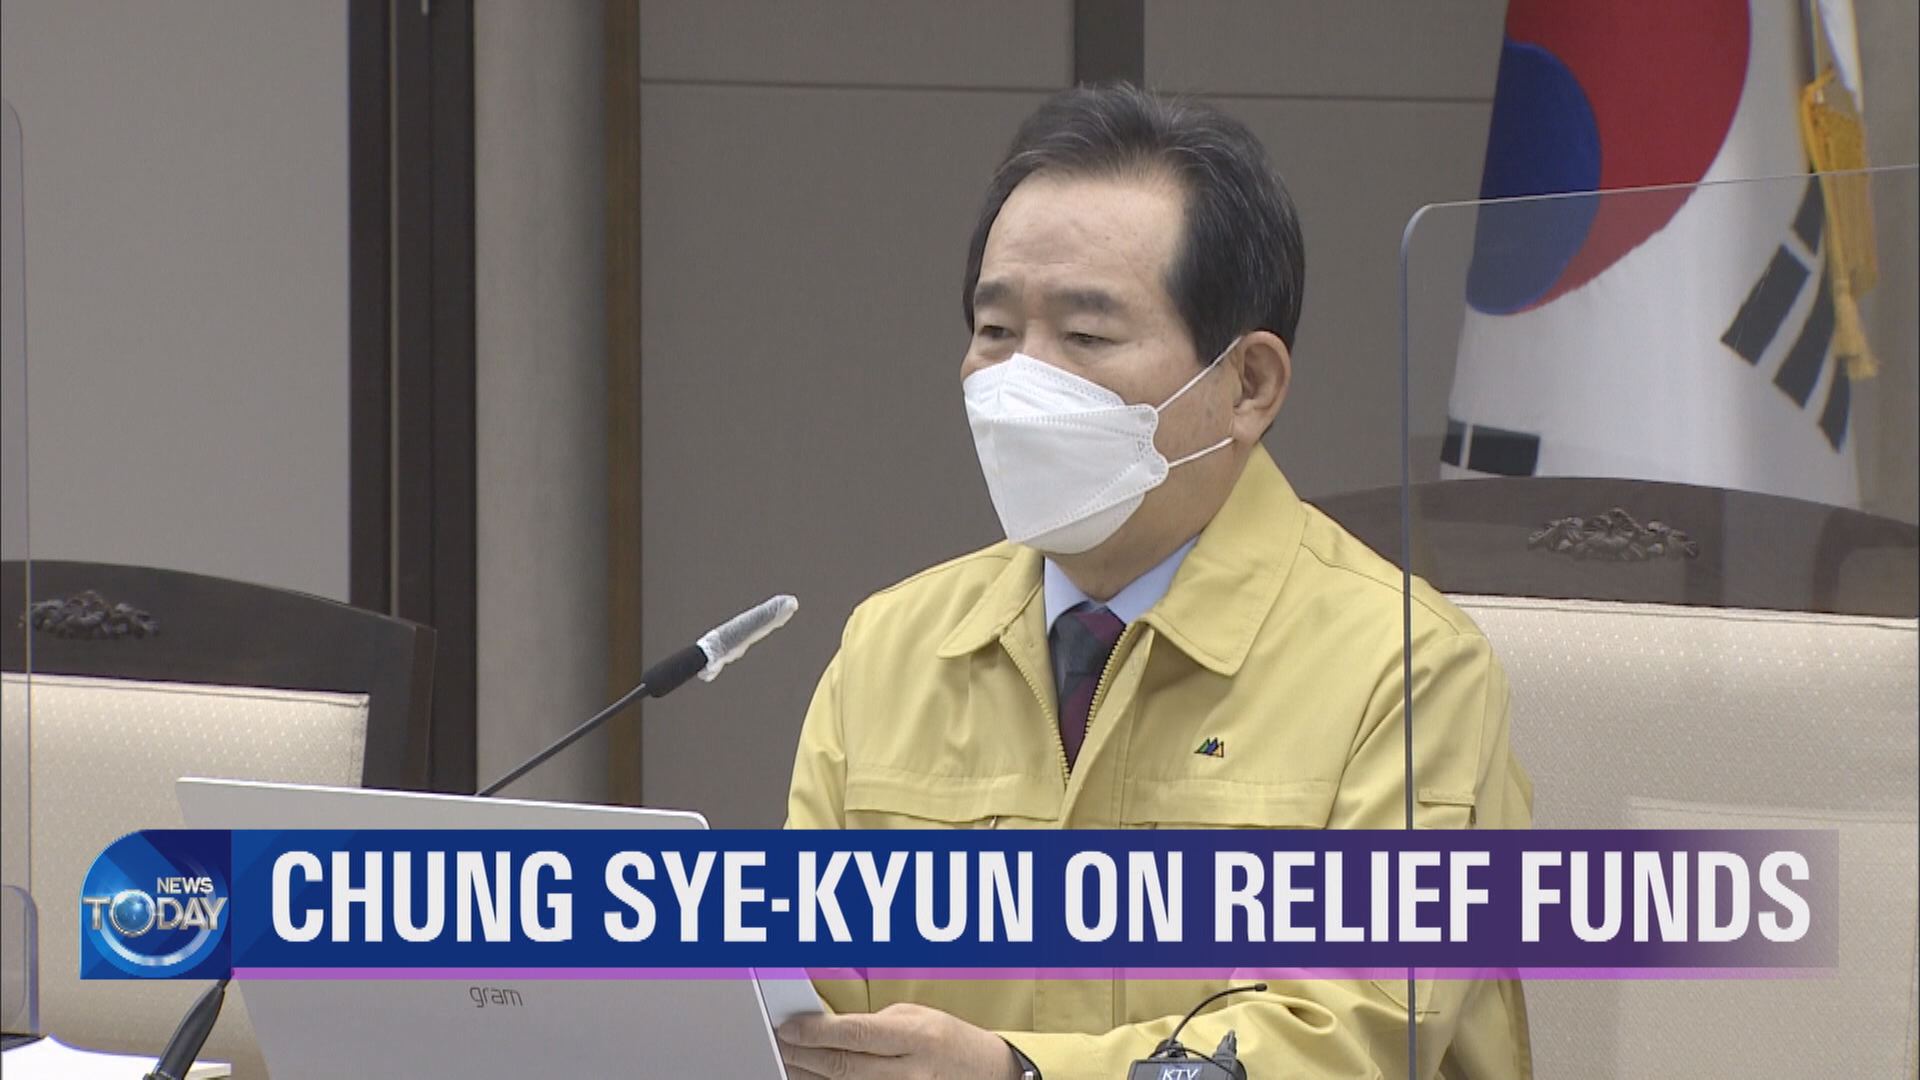 CHUNG SYE-KYUN ON RELIEF FUNDS